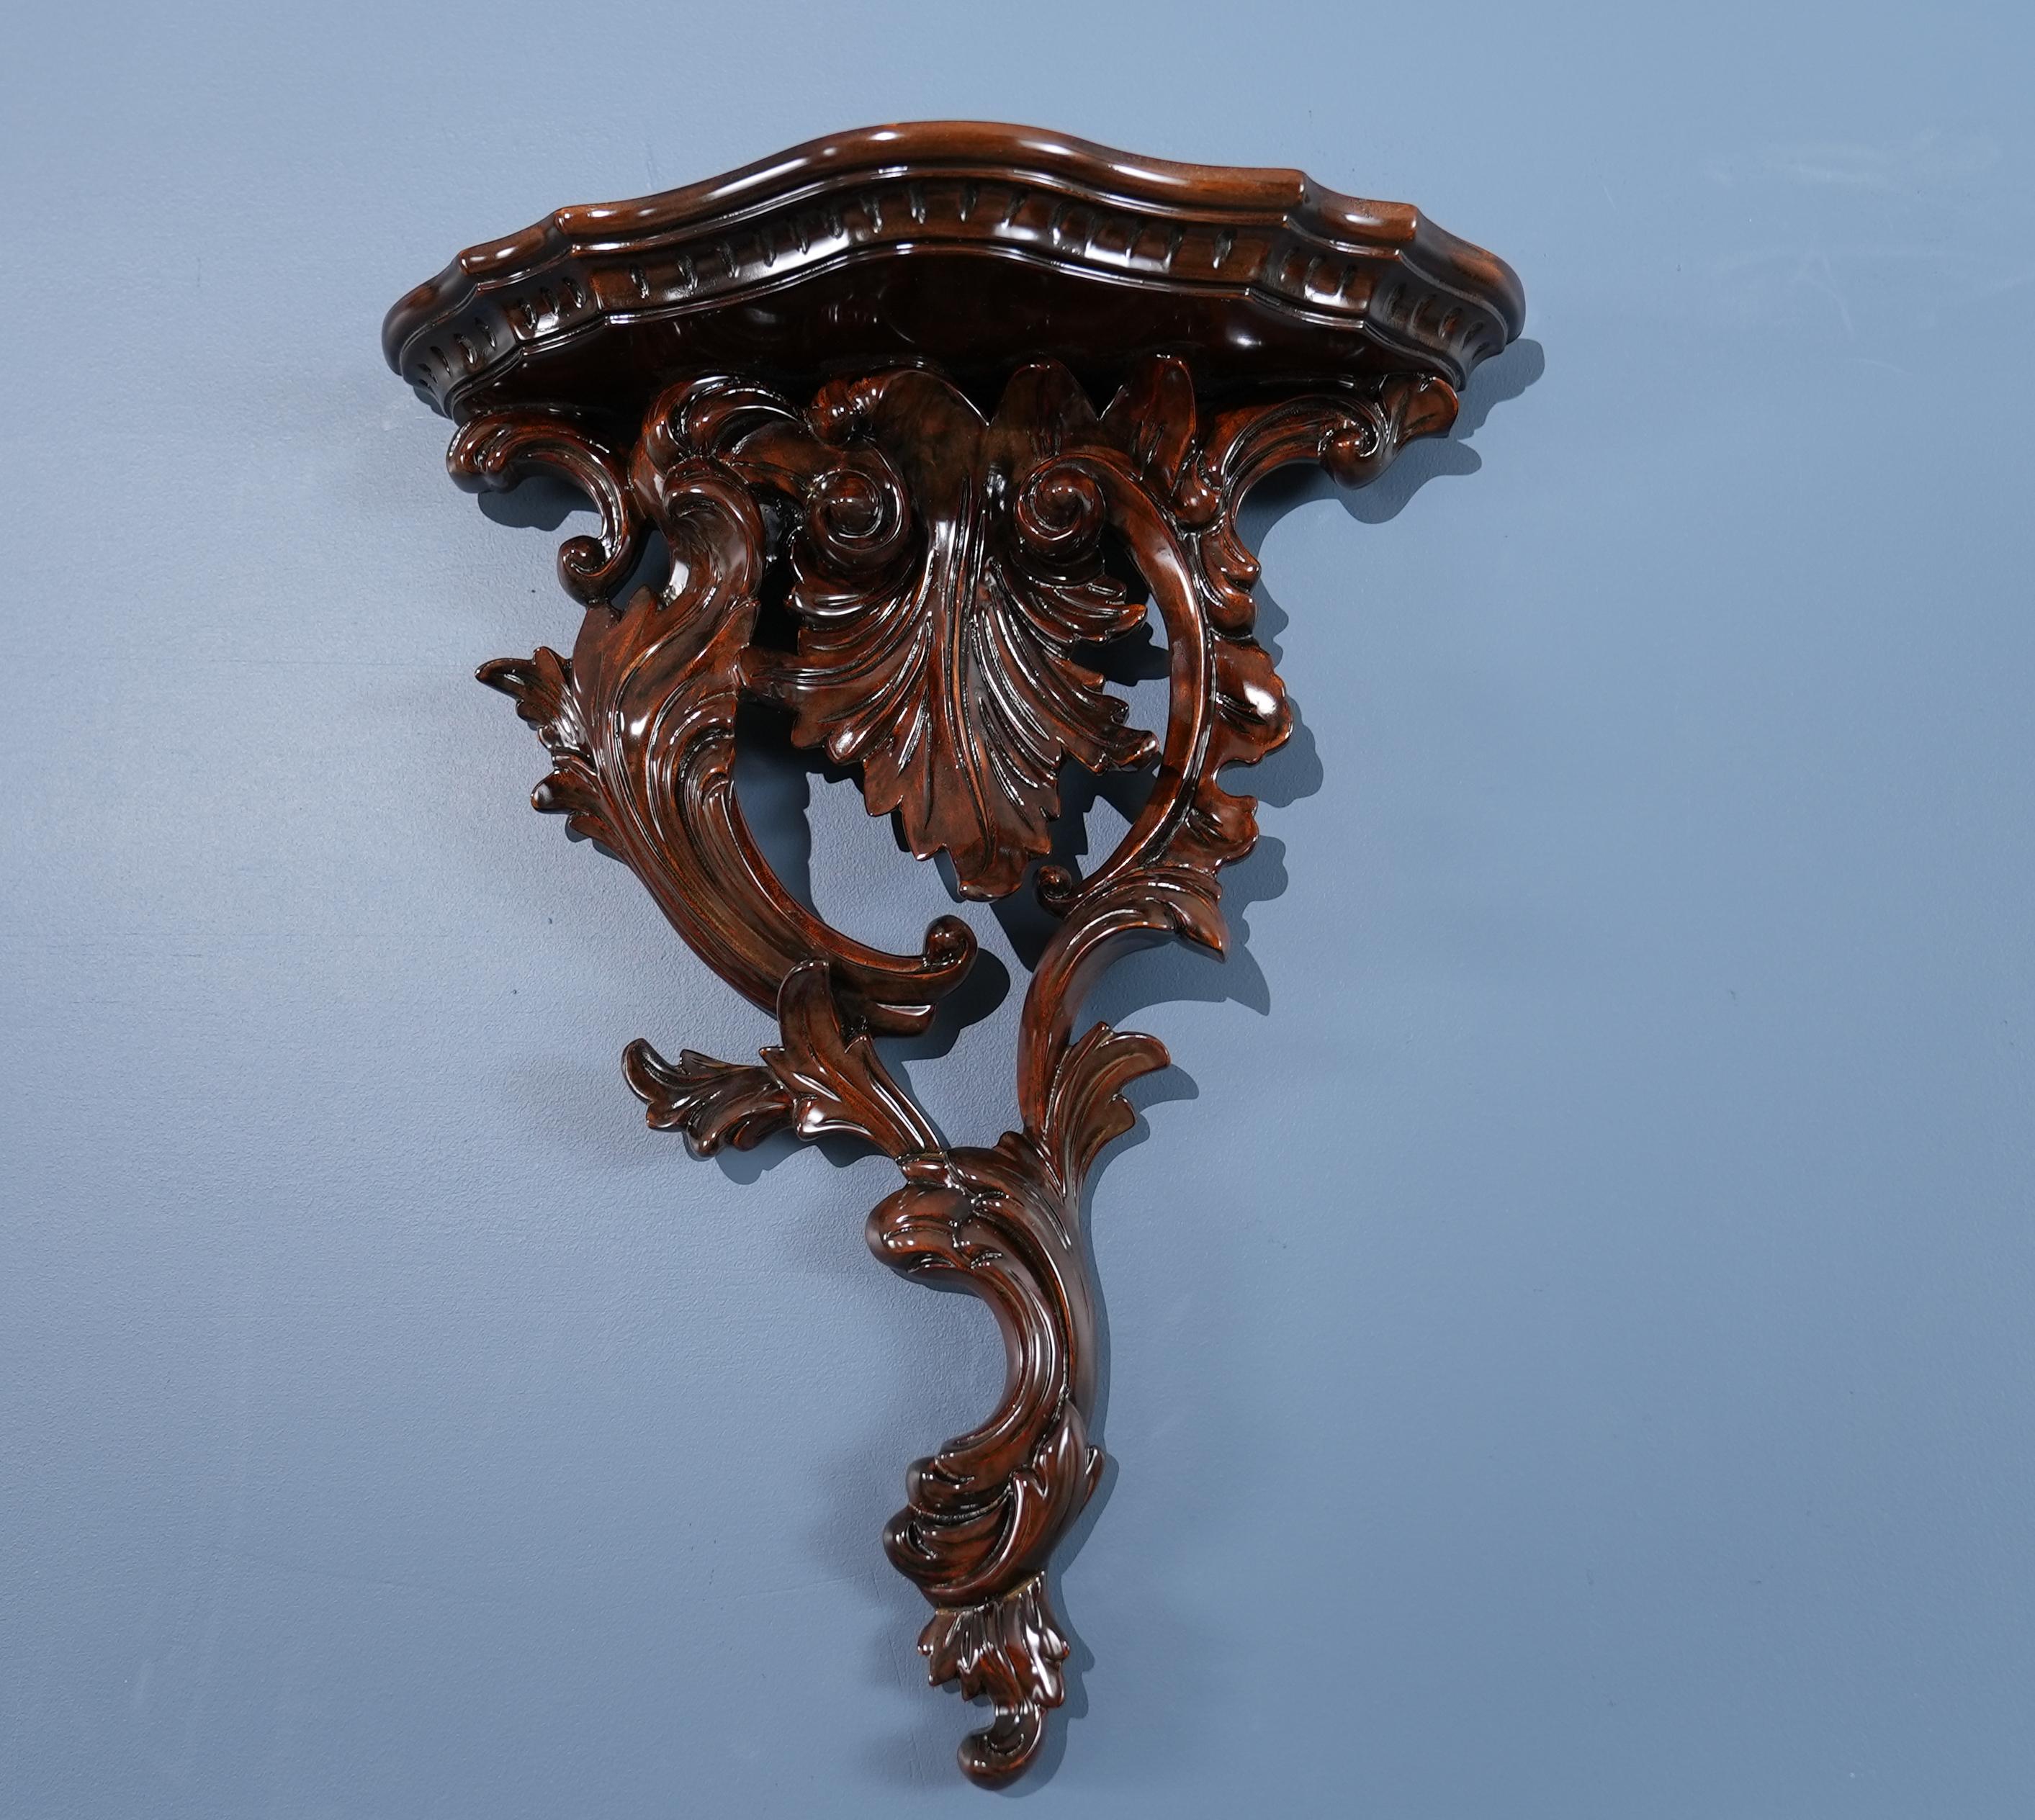 These stylish and elegant, hand sculpted, Pair of Carved Wooden Wall Sconces bring a classic look to any home decor setting. It’s the perfect compliment to space, or to flank a mirror, window or painting. With the top shelf, you can display photos,